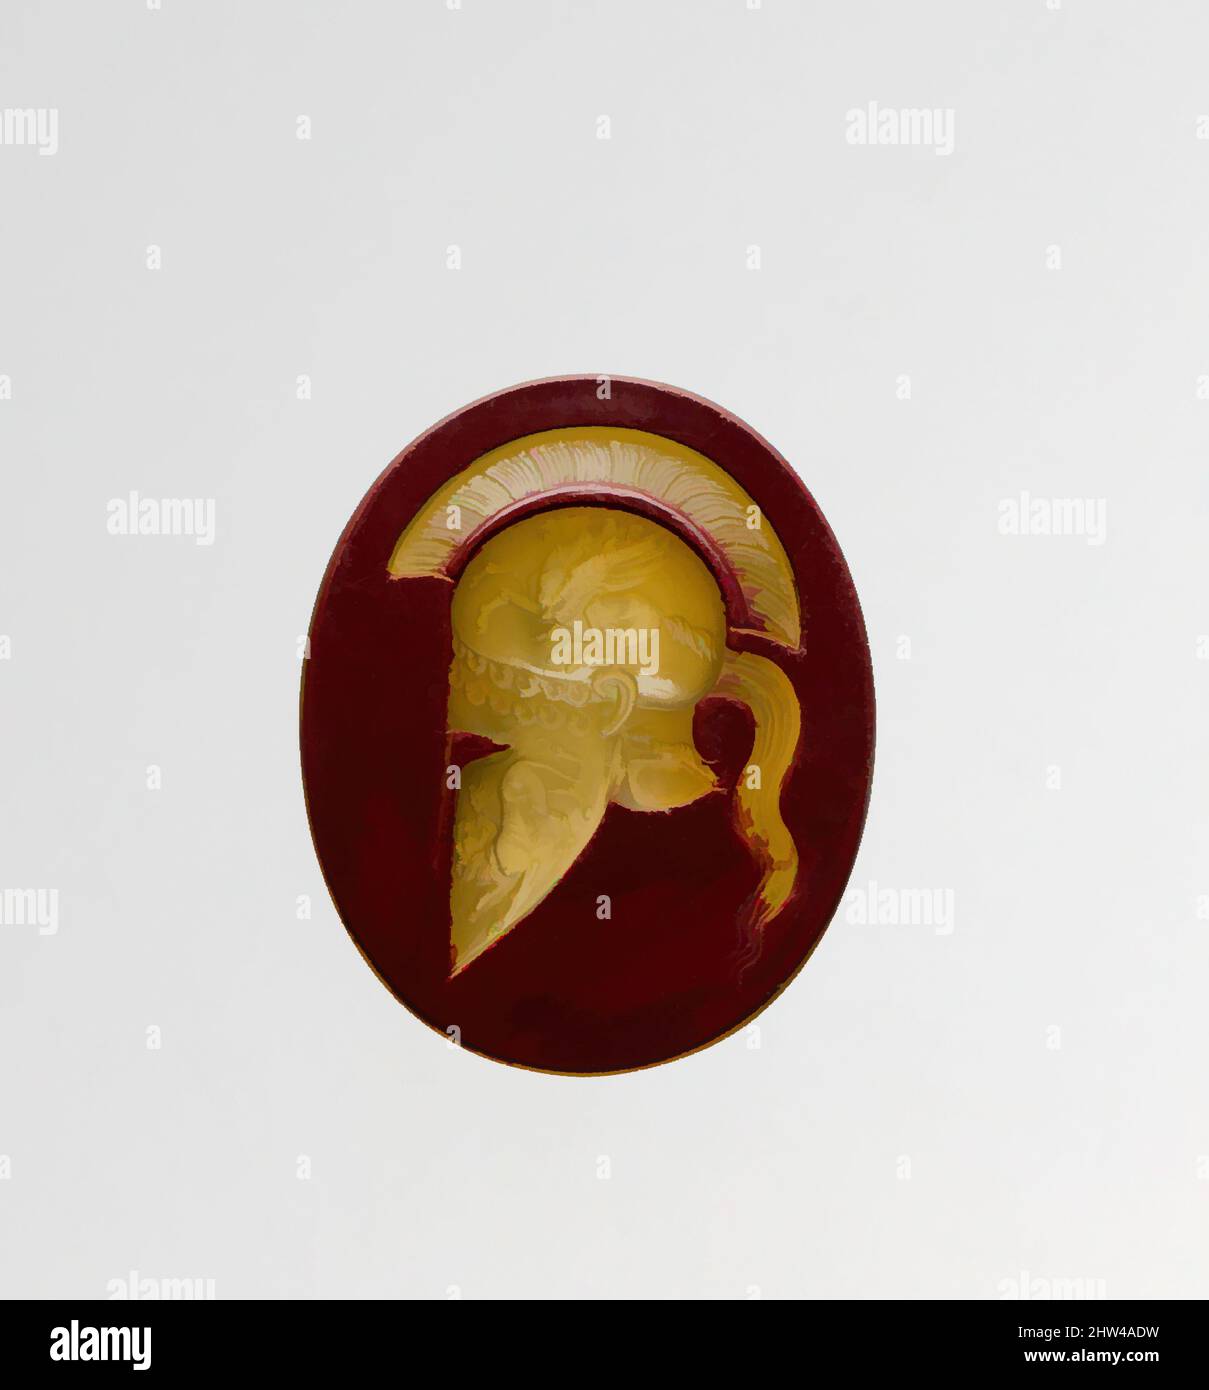 Art inspired by Red jasper ring stone, Late Republican or Imperial, ca. 1st century B.C.–3rd century A.D., Roman, Jasper, Length: 13/16 in. (2.1 cm), Gems, Helmet decorated with Bellerophon on Pegasos; chimaera and dog, Classic works modernized by Artotop with a splash of modernity. Shapes, color and value, eye-catching visual impact on art. Emotions through freedom of artworks in a contemporary way. A timeless message pursuing a wildly creative new direction. Artists turning to the digital medium and creating the Artotop NFT Stock Photo